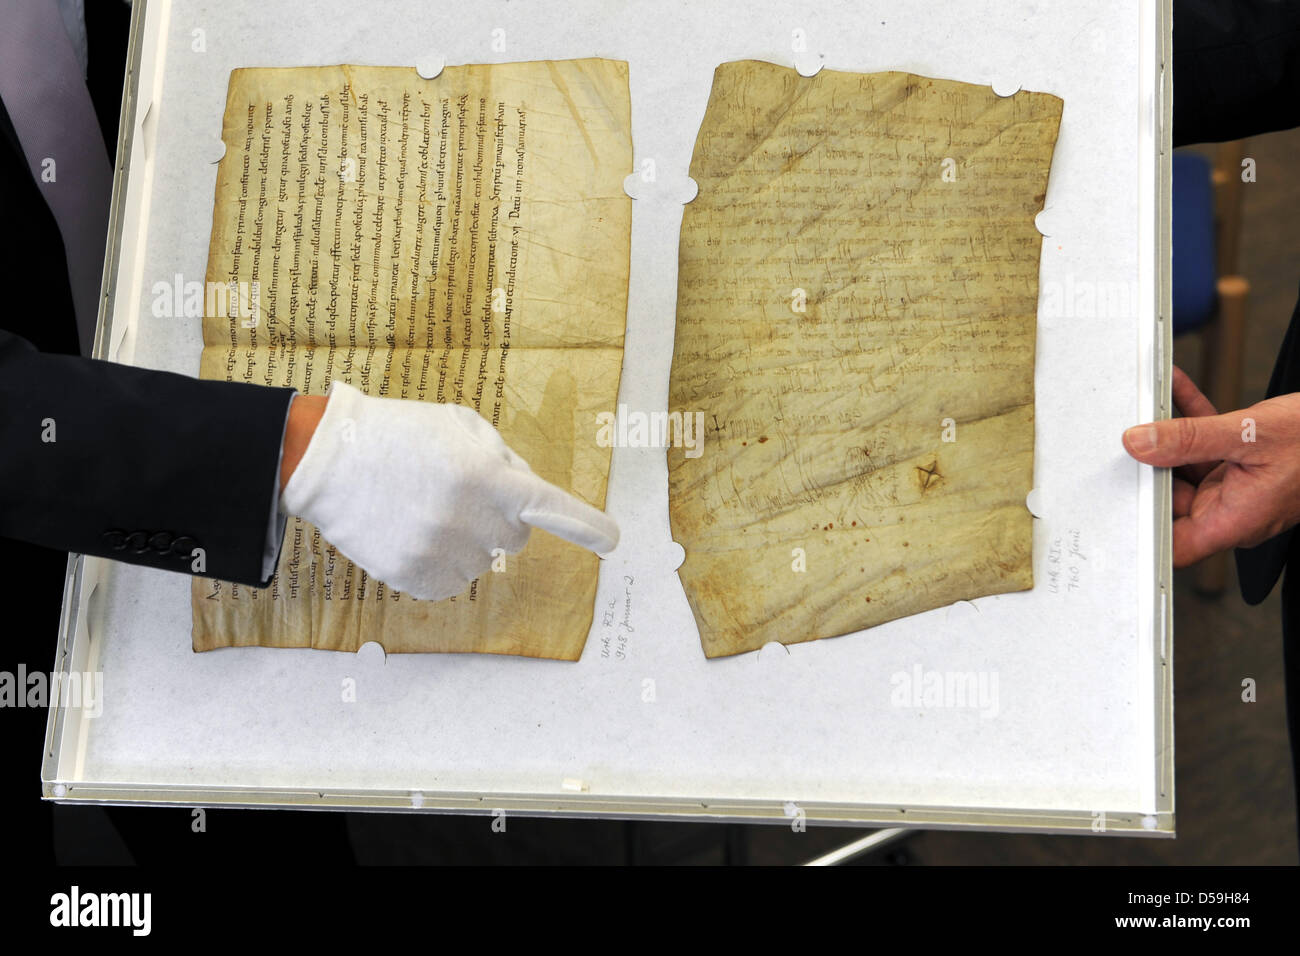 A hand points on the eldest preserved document issued by a knig in Marburg, Germany, 23 June 2010. The pergament was issued in 1250 AD by Carolingian King Pippn III, father of Charlemagne. In the document, Pippin III donates a large amount to the cloister of Fulda. Photo: Uwe Zucchi Stock Photo